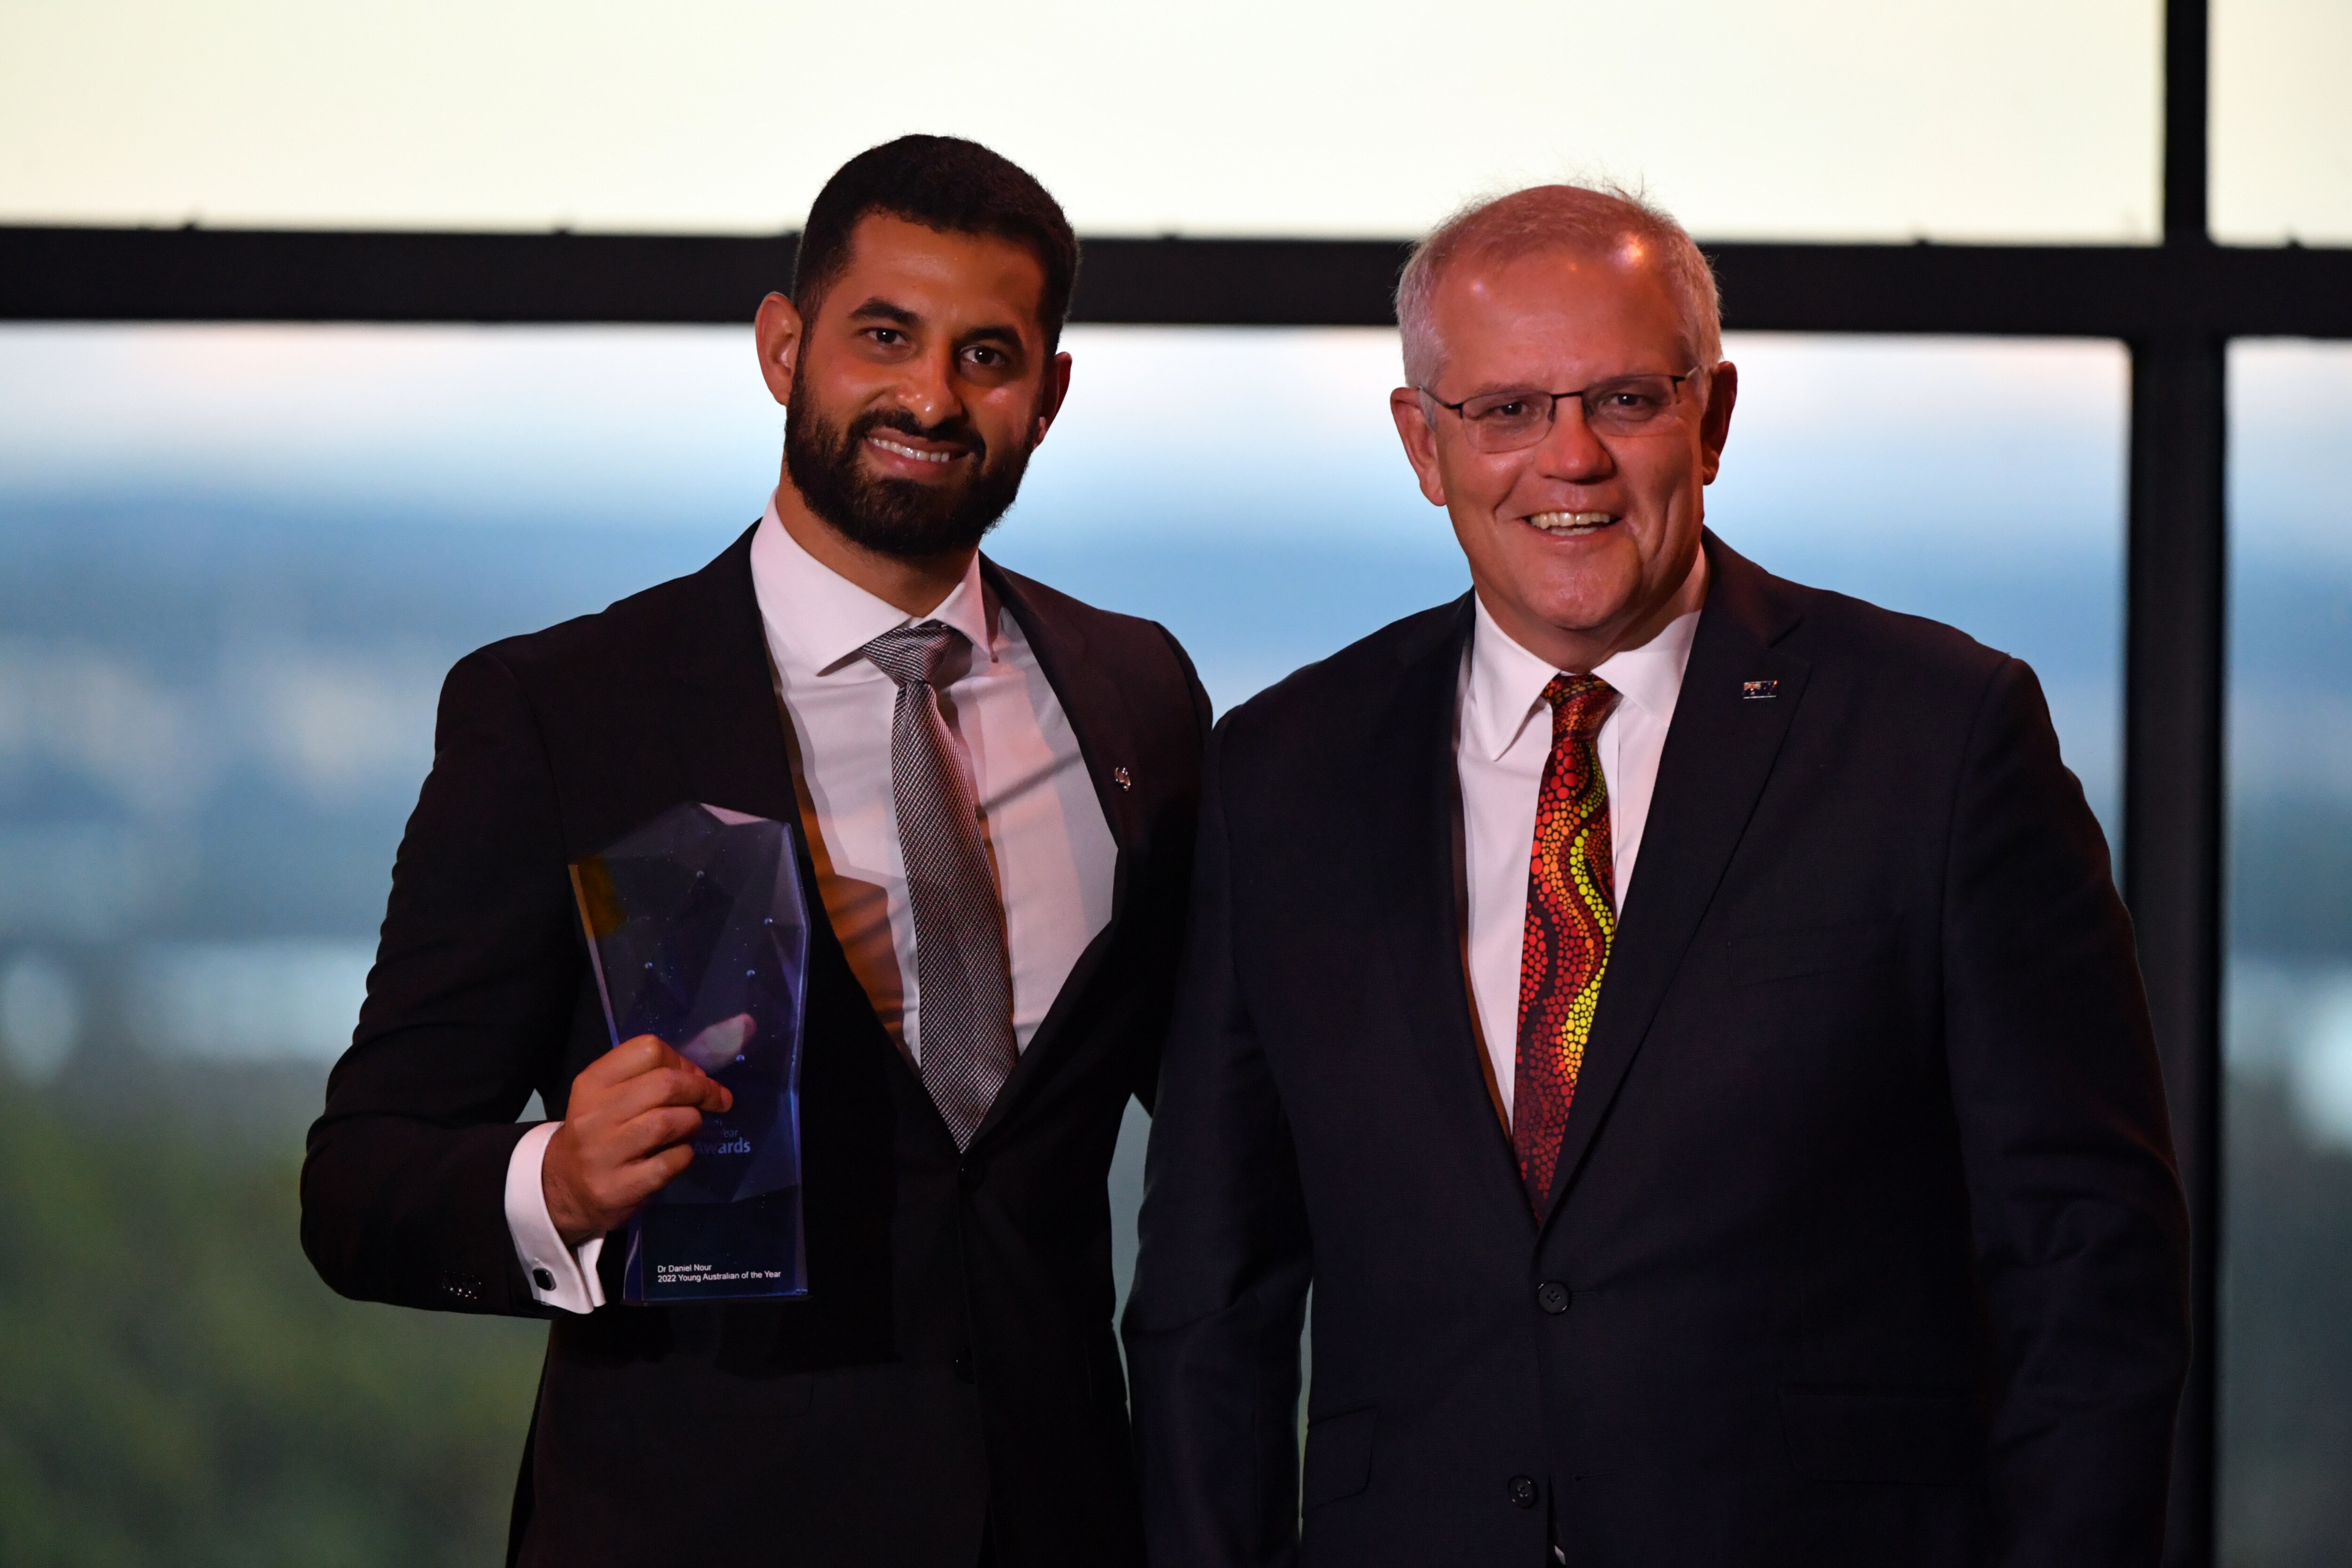 Prime Minister Scott Morrison (right) and the 2022 Young Australian of the Year winner Dr Daniel Nour.